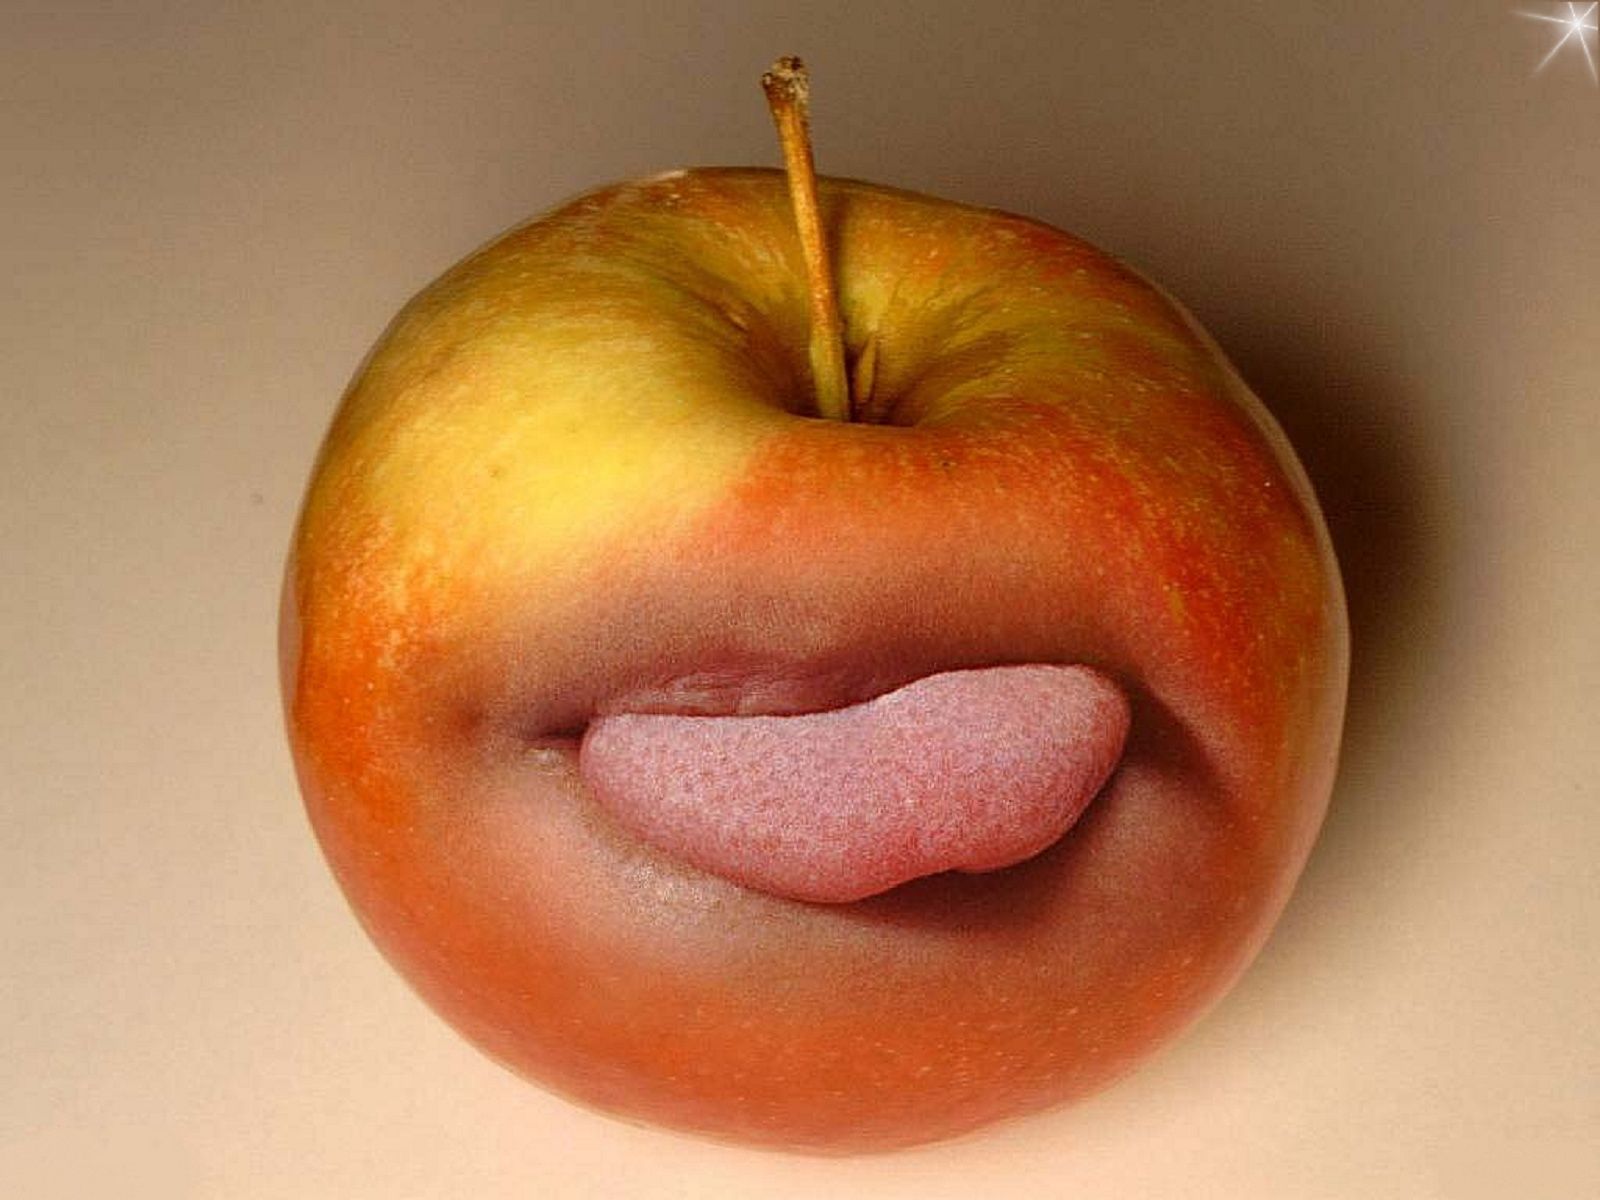 Funny Fruits HD Wallpaper free for download